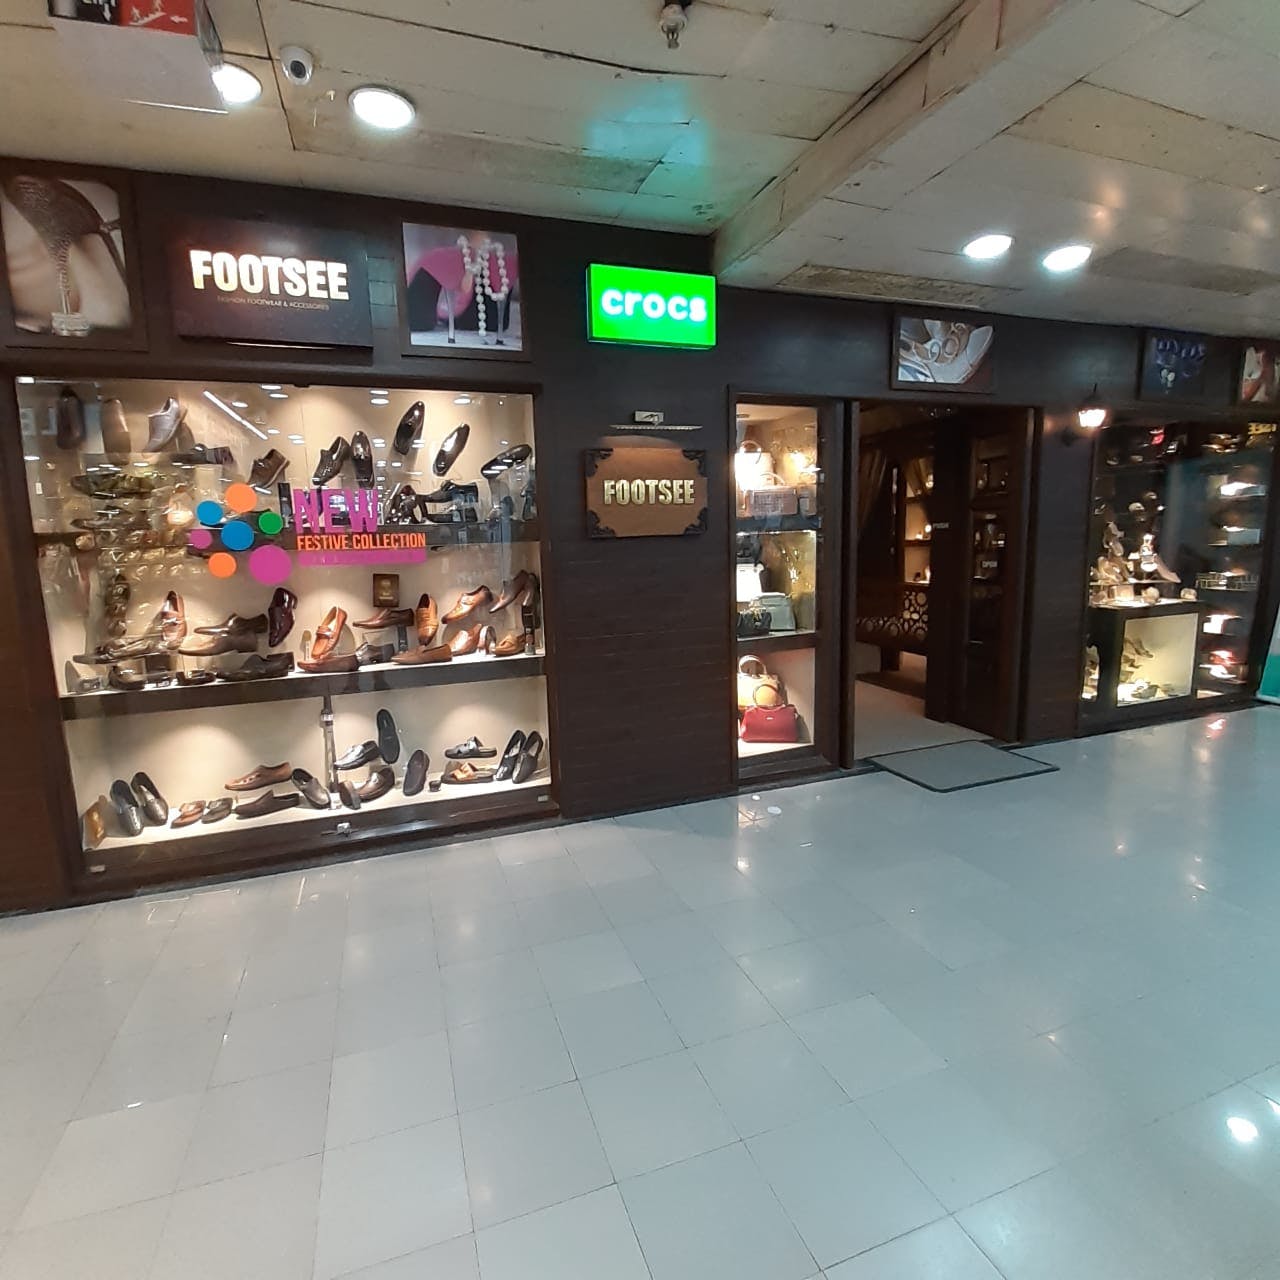 Shopping mall,Building,Retail,Footwear,Interior design,Outlet store,Shoe,Fashion accessory,Floor,Shopping